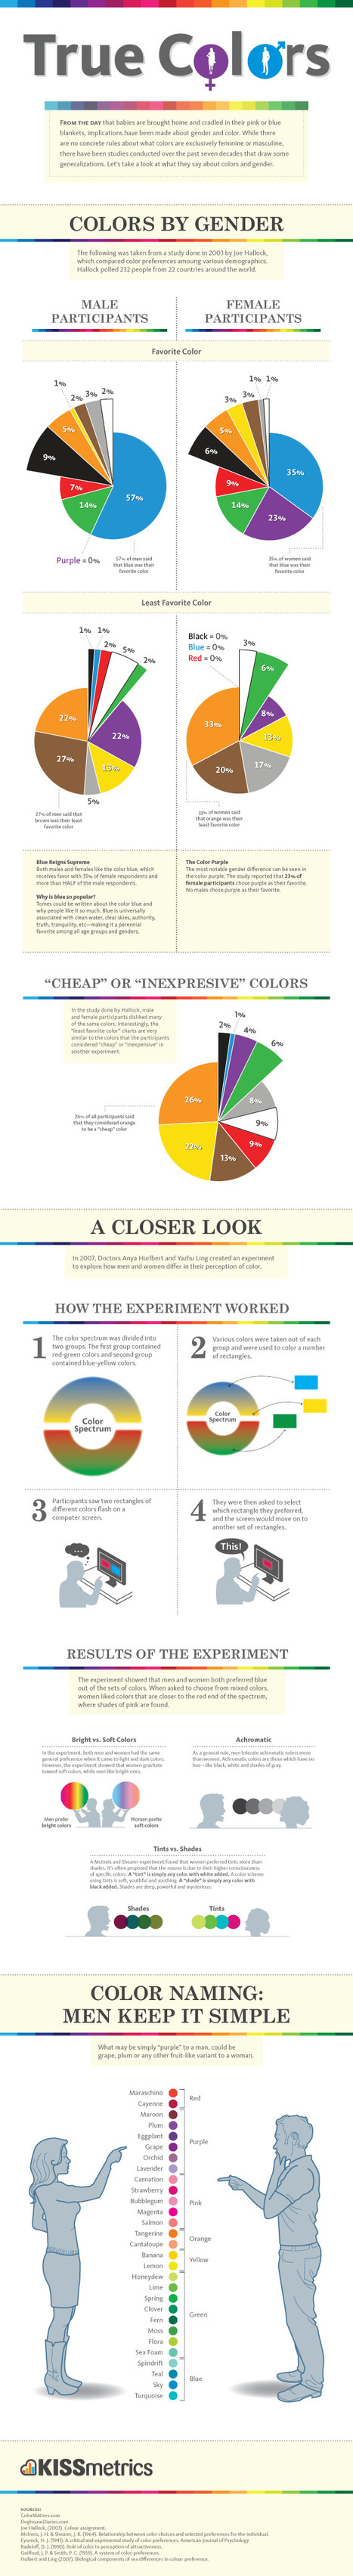 Color Is Master Of Us All: Color Preference By Gender [Infographic] | digital marketing strategy | Scoop.it